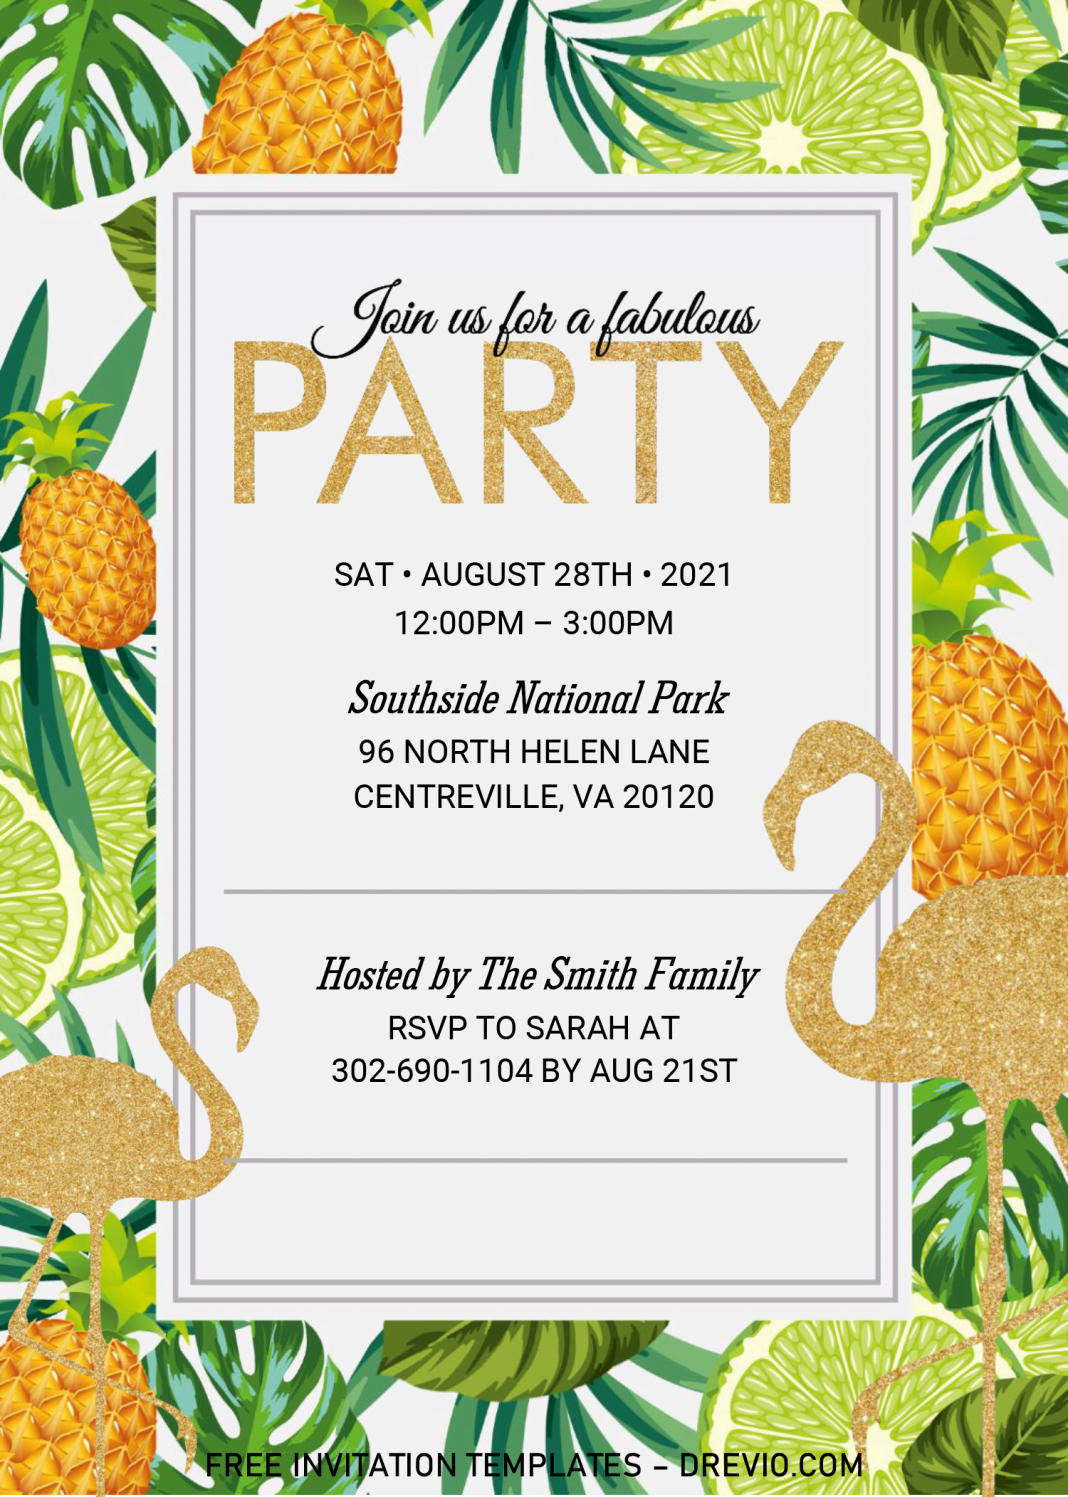 Summer Party Invitation Templates – Editable With MS Word | Download ...